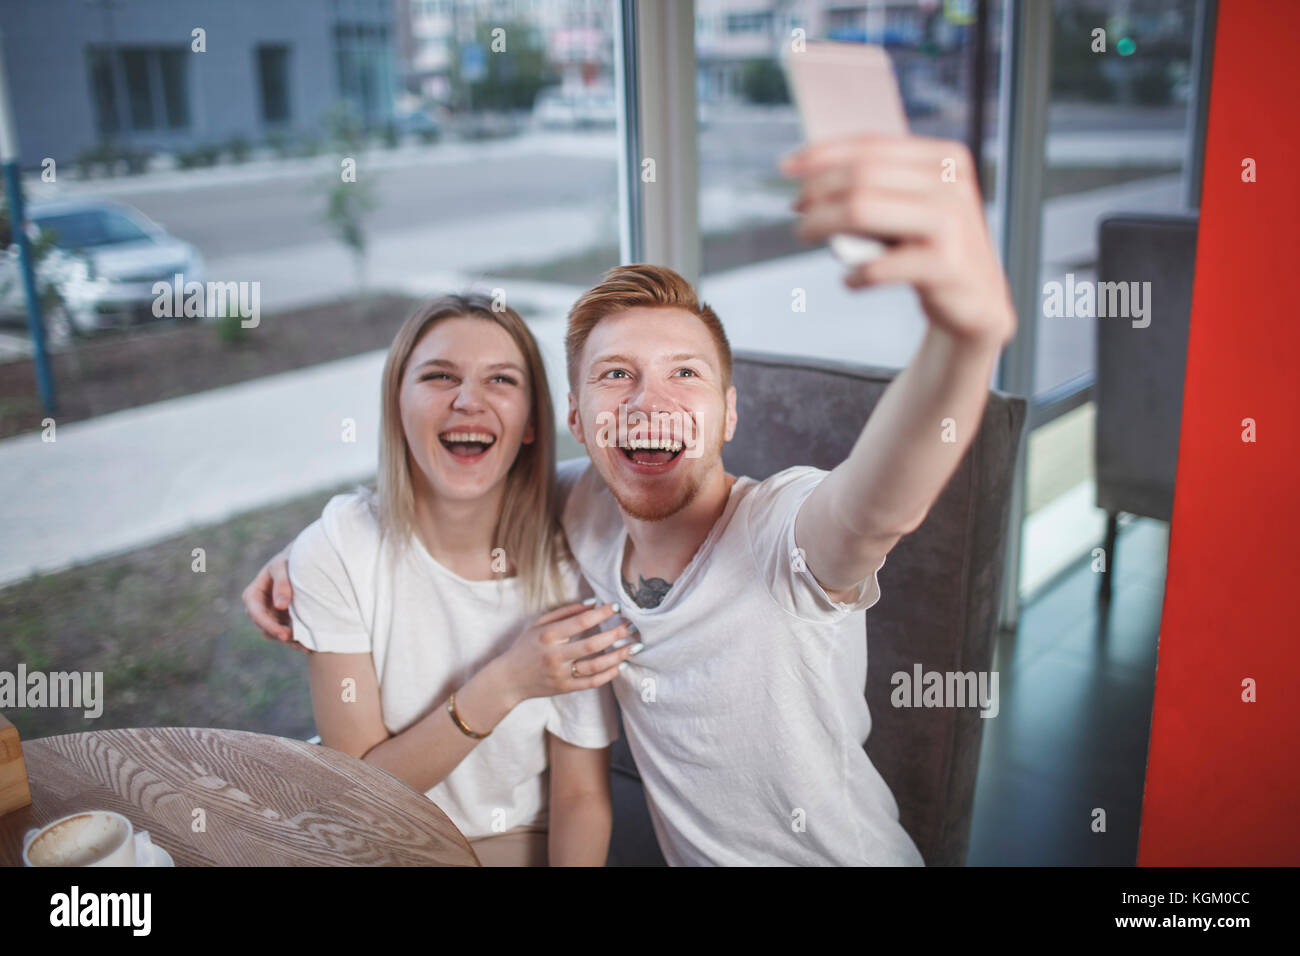 Portrait of happy young couple avec selfies mobile phone while sitting at restaurant Banque D'Images